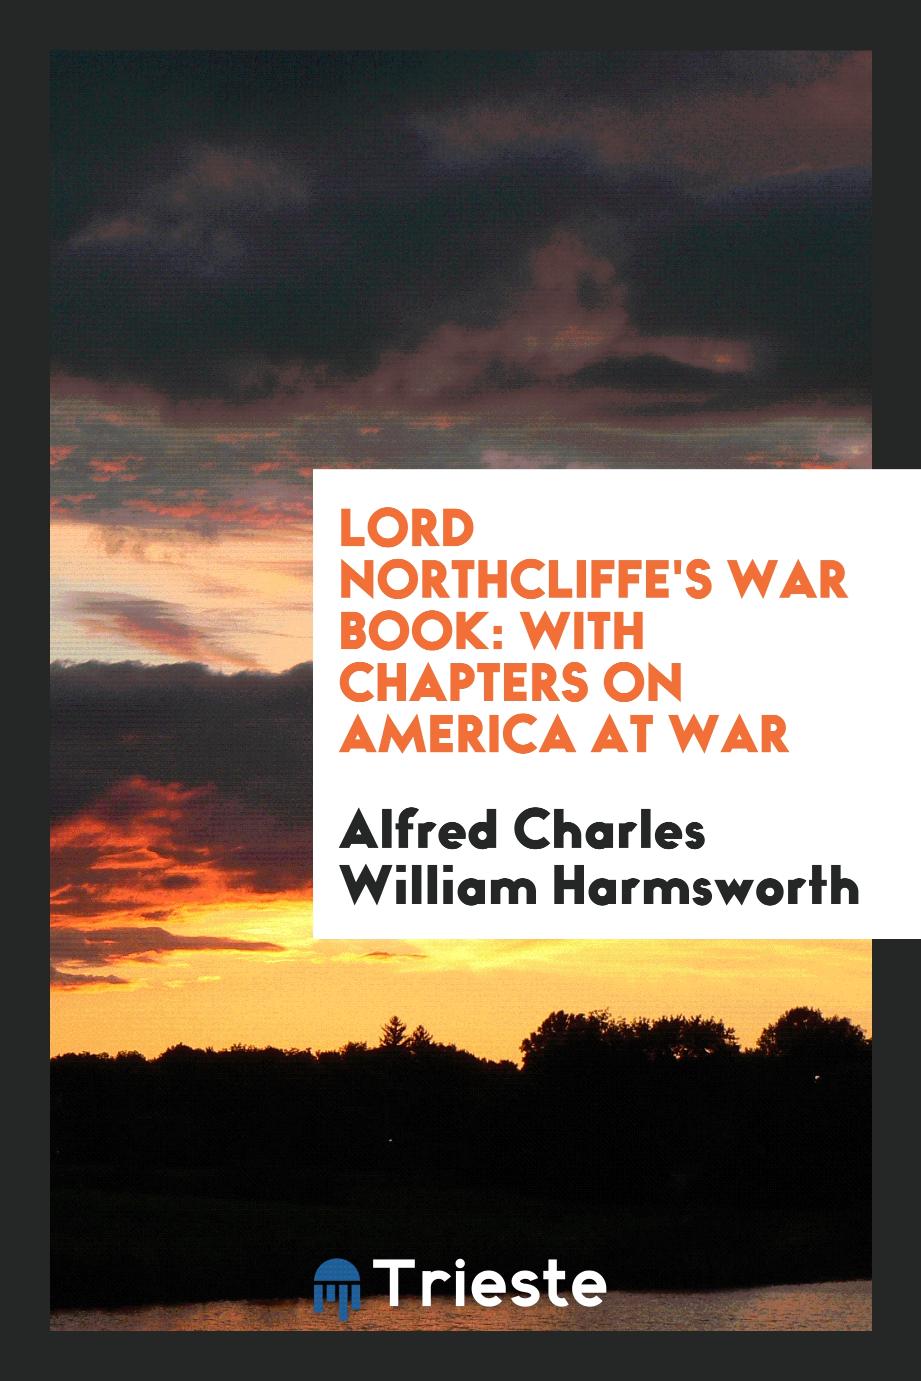 Lord Northcliffe's War Book: With Chapters on America at War